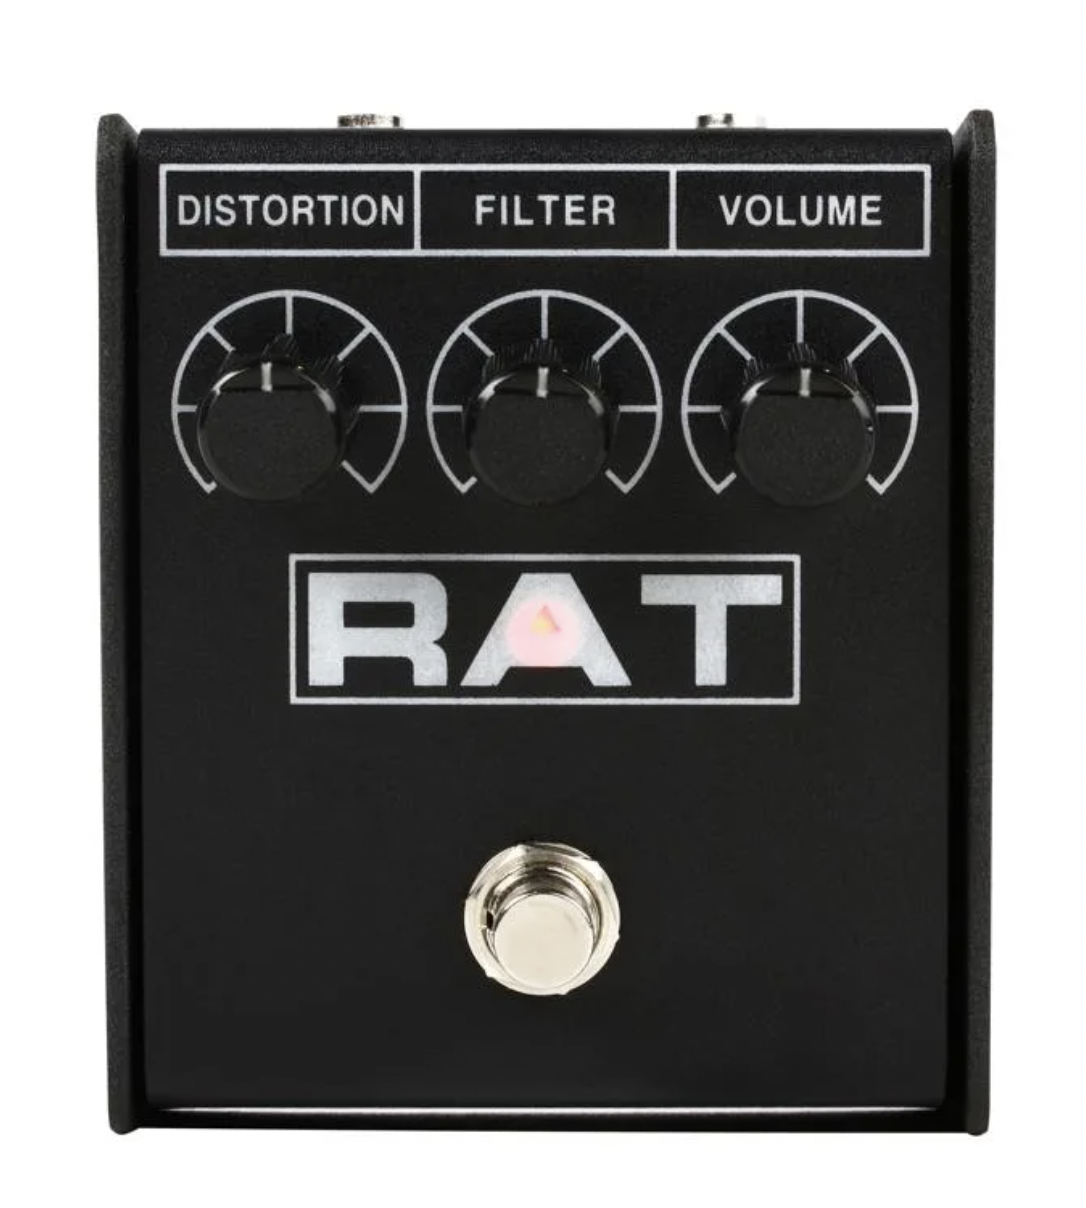 The Rat from Pro Co, a classic distortion pedal for guitar players